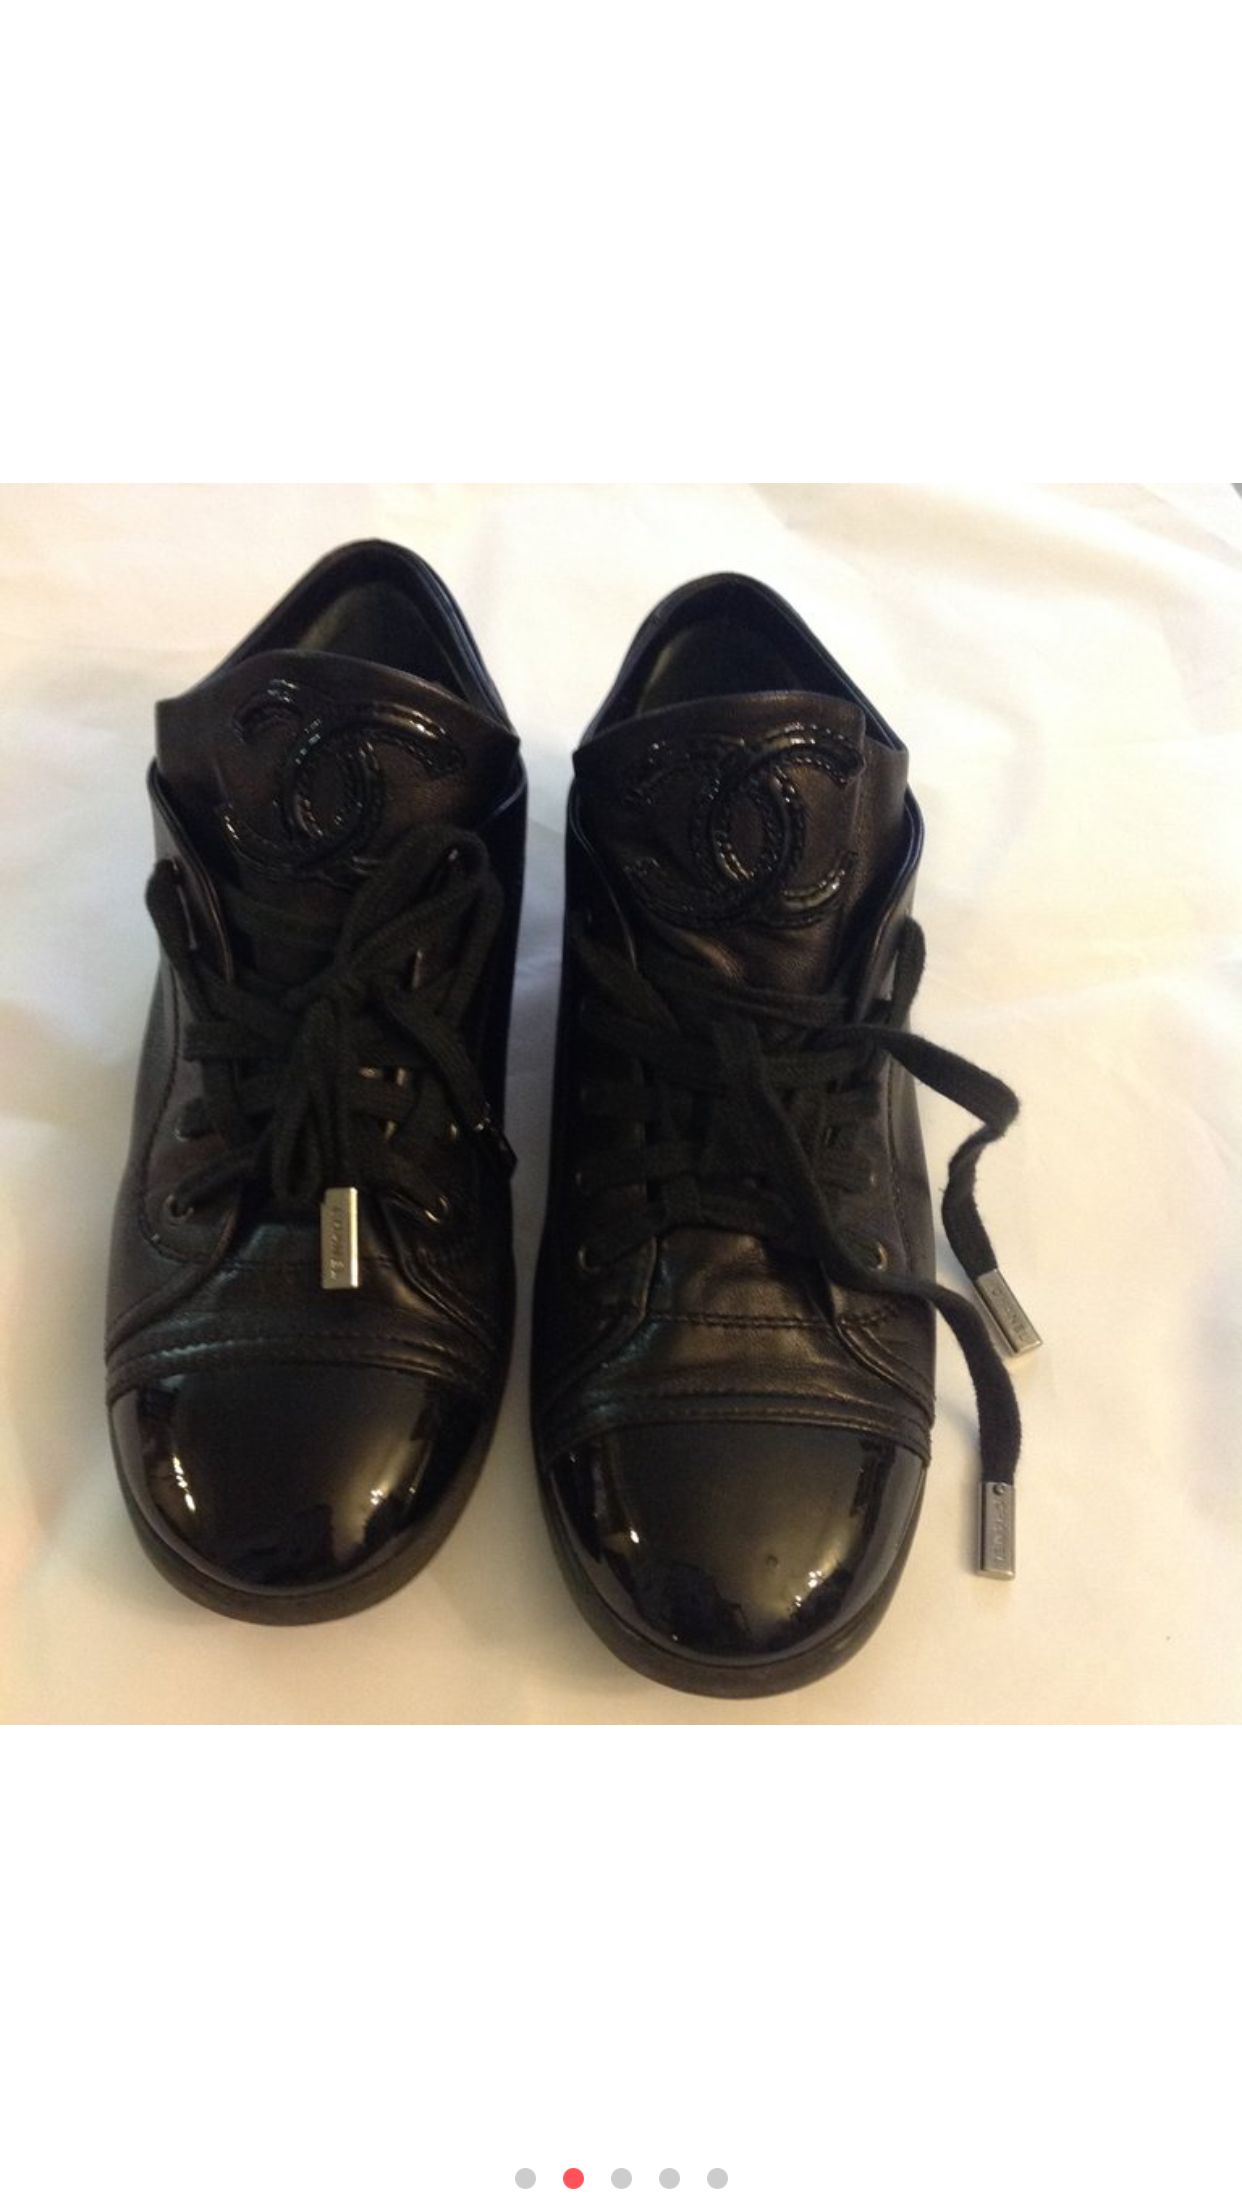 CHANEL, Shoes, Chanel Fabric Calfskin Suede Cc Sneakers 4 12 Black